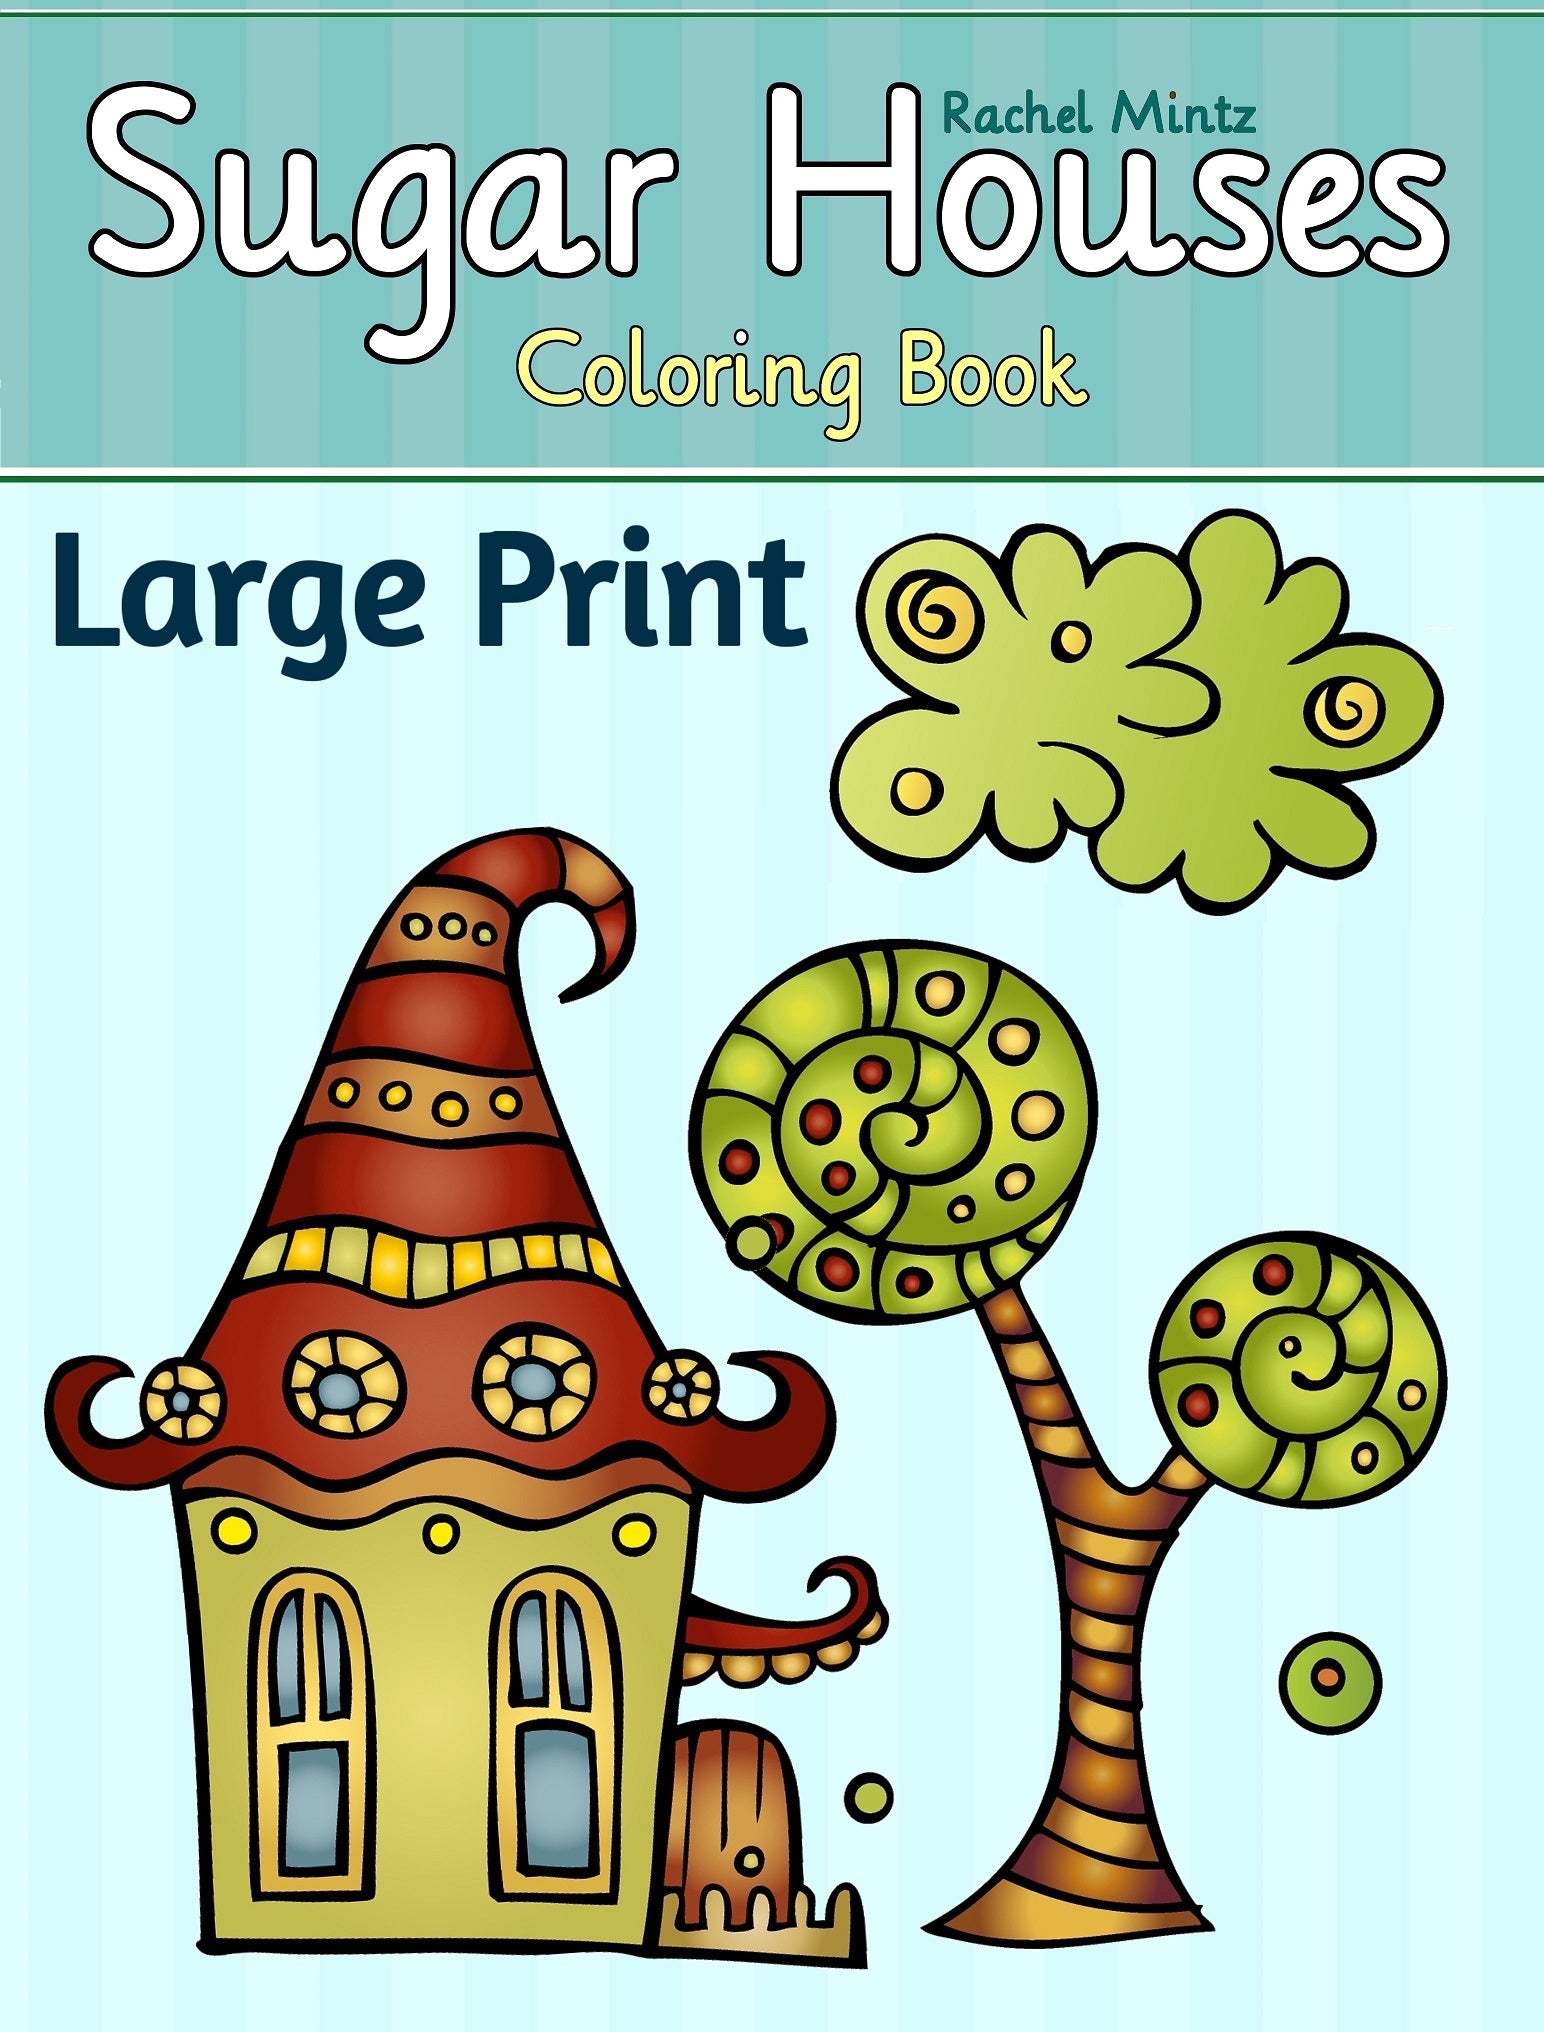 Sugar Houses - Large Print Designs For Seniors or Visually Impaired (PDF Format Book)